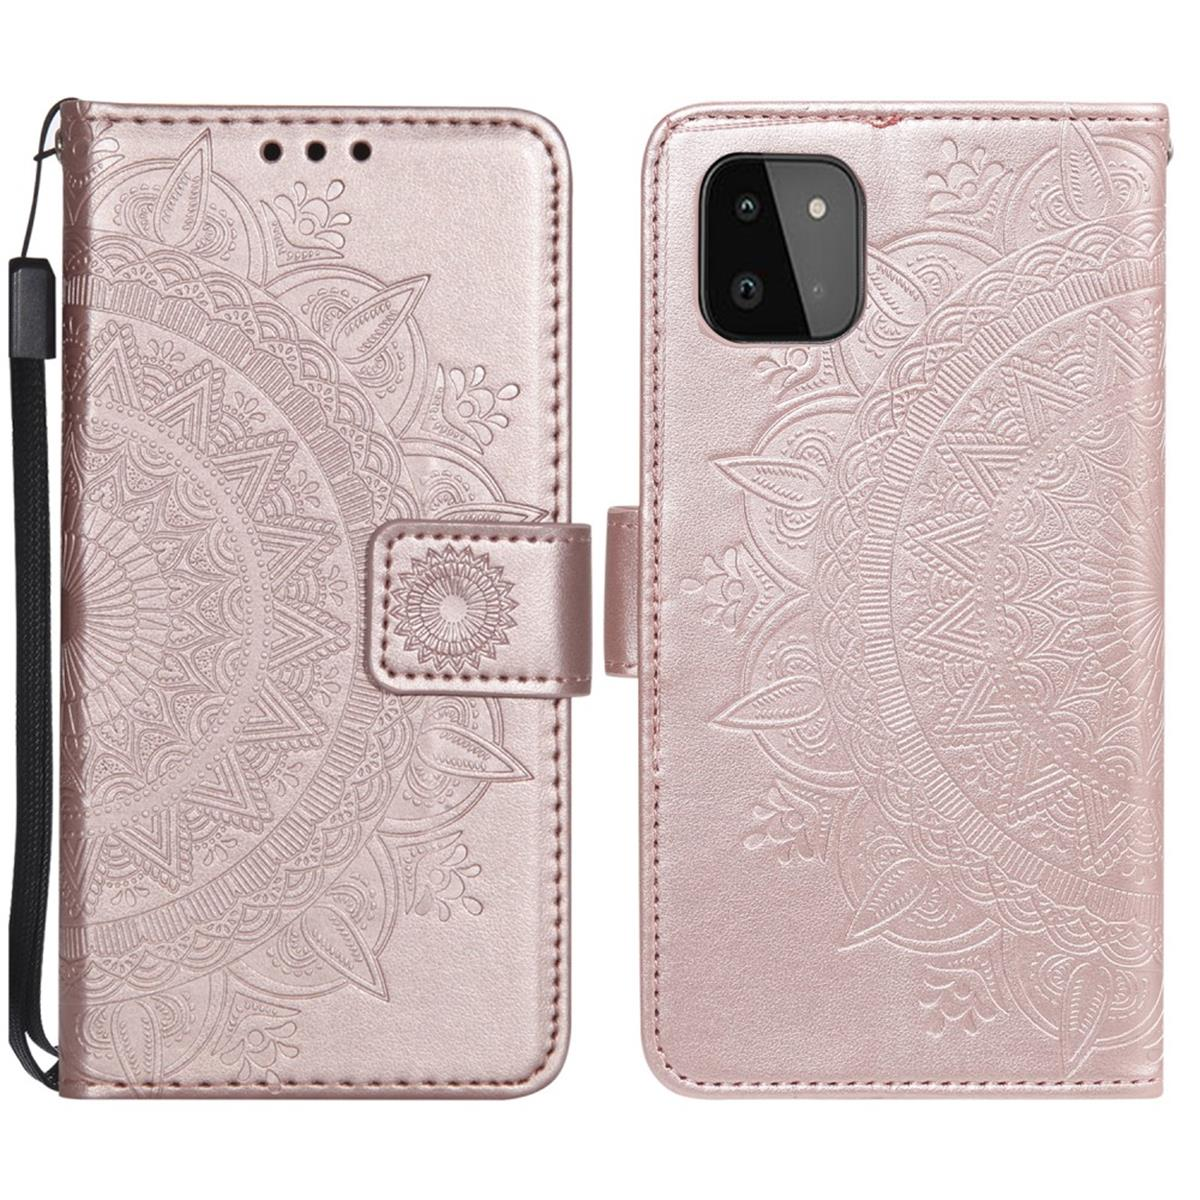 Galaxy Samsung, Roségold Bookcover, Mandala COVERKINGZ Muster, 5G, mit A22 Klapphülle